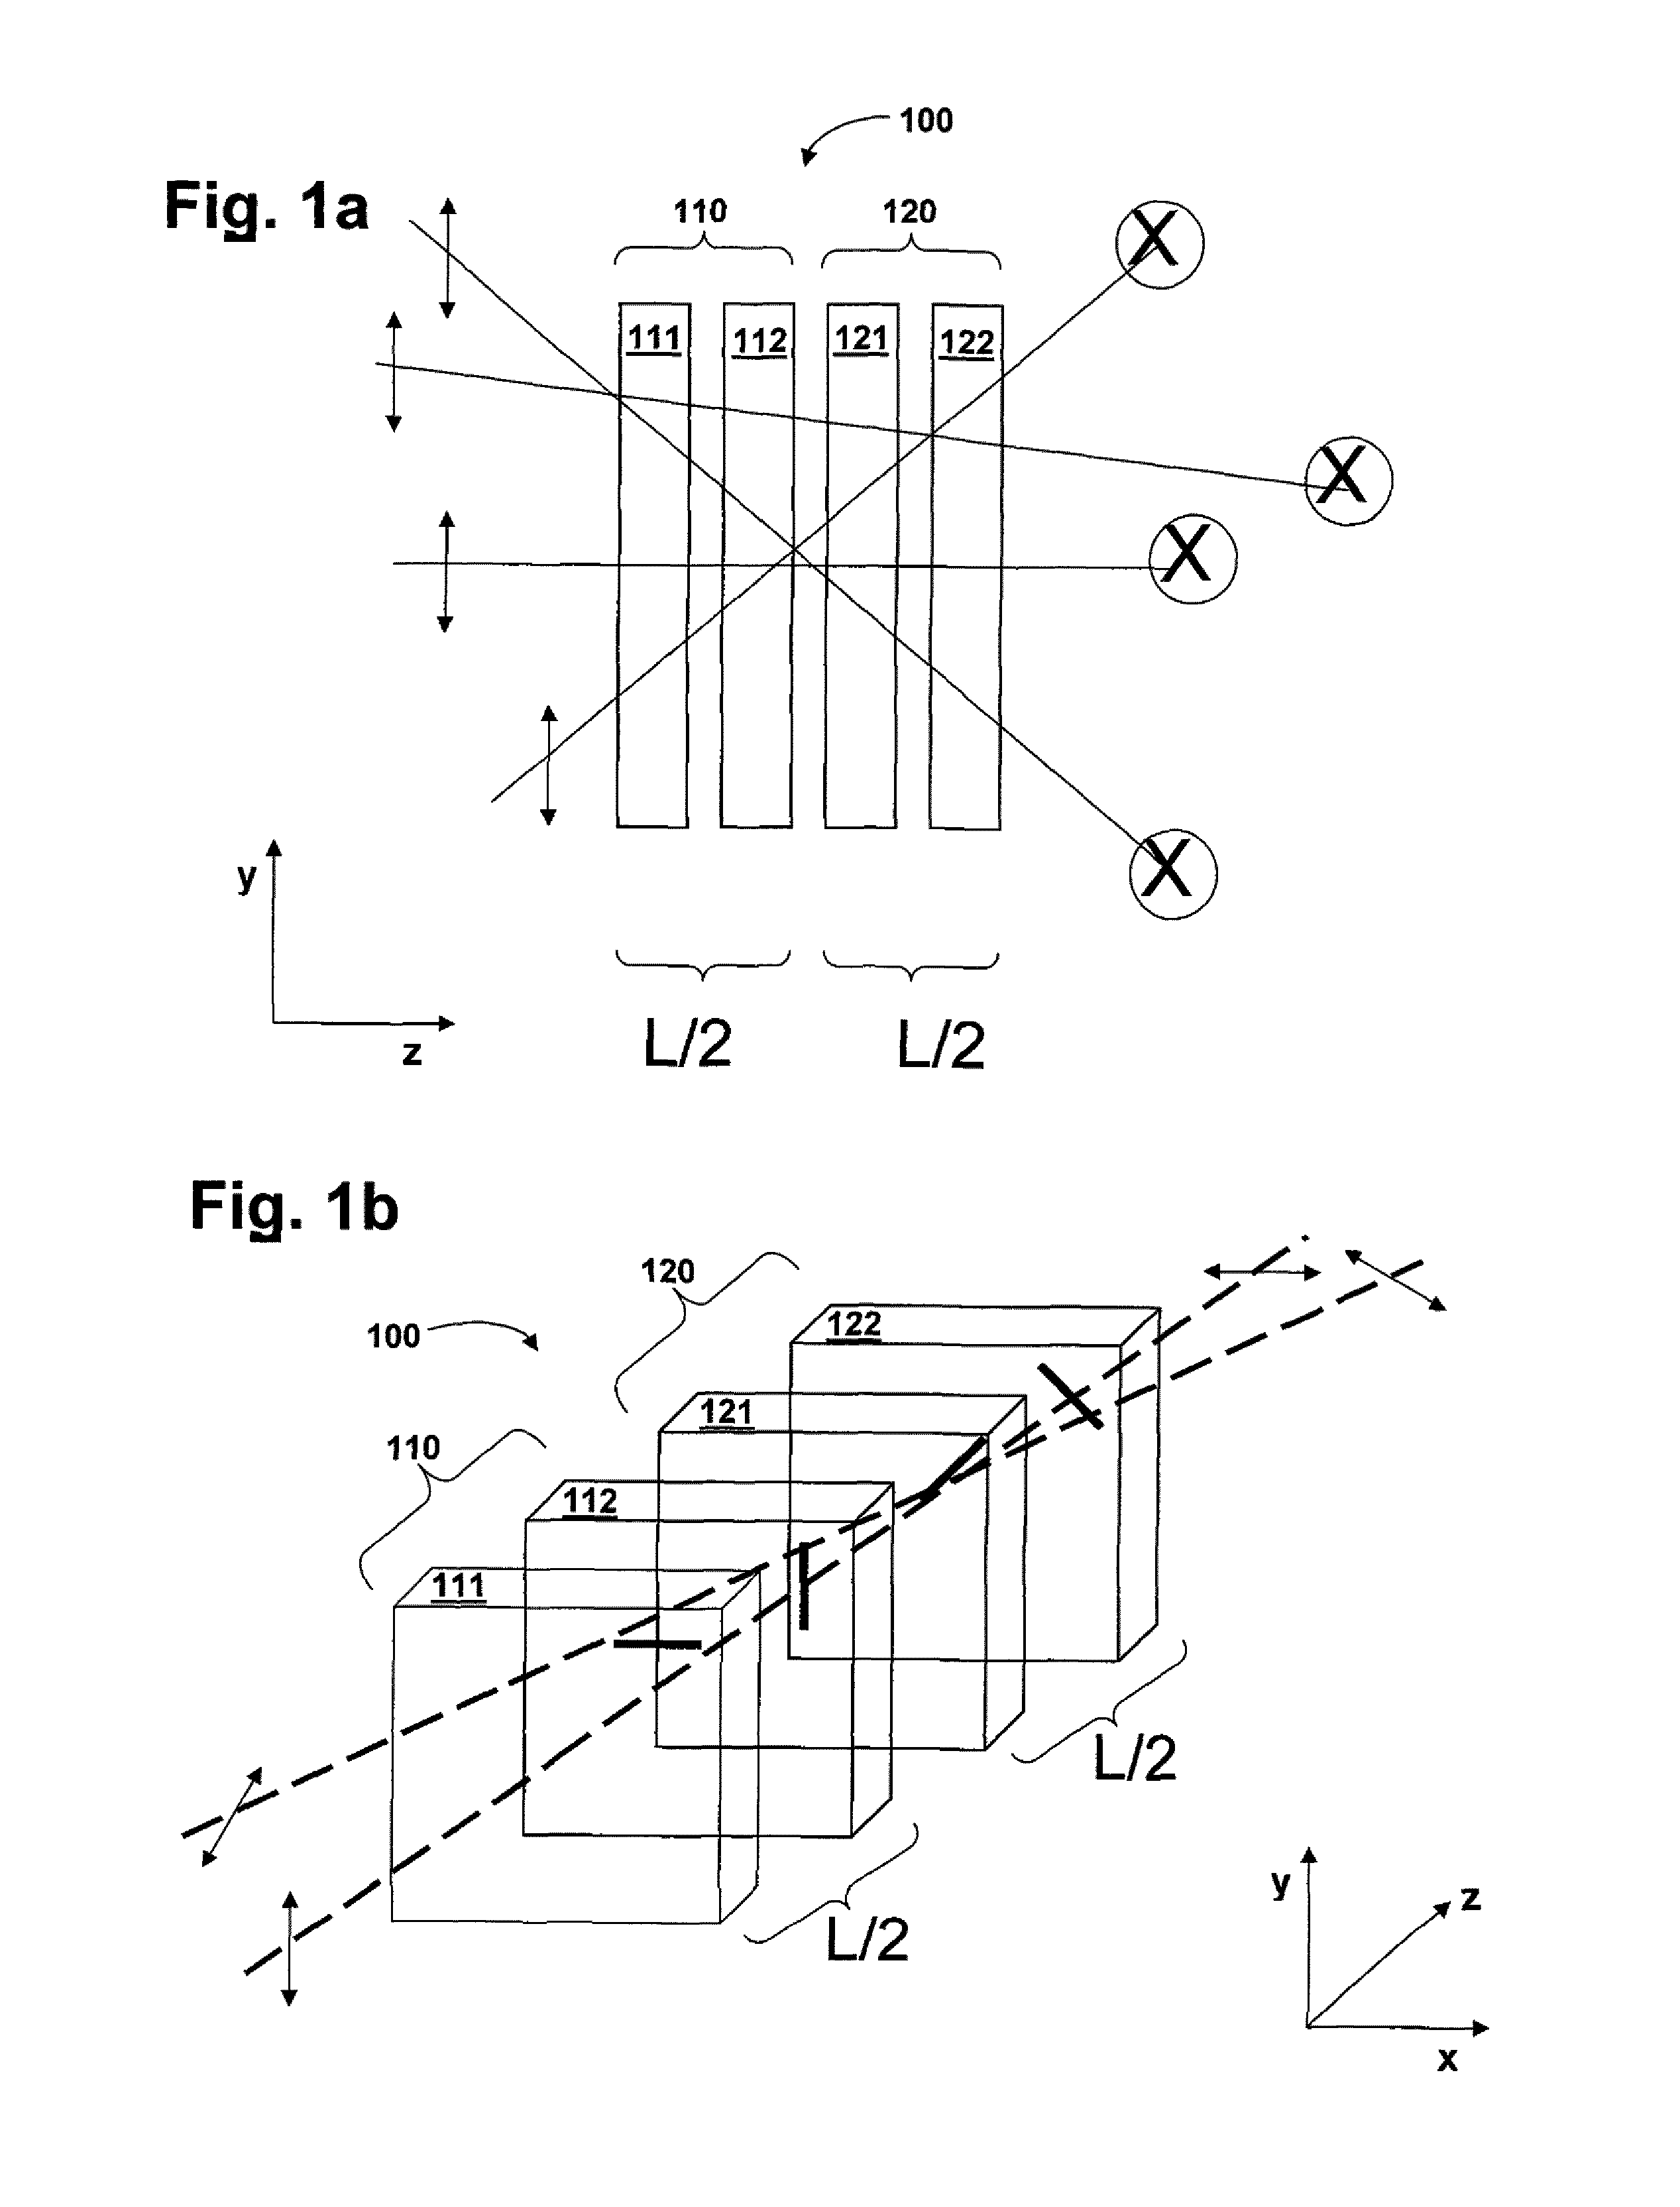 Polarization-influencing optical arrangement, in particular in a microlithographic projection exposure apparatus